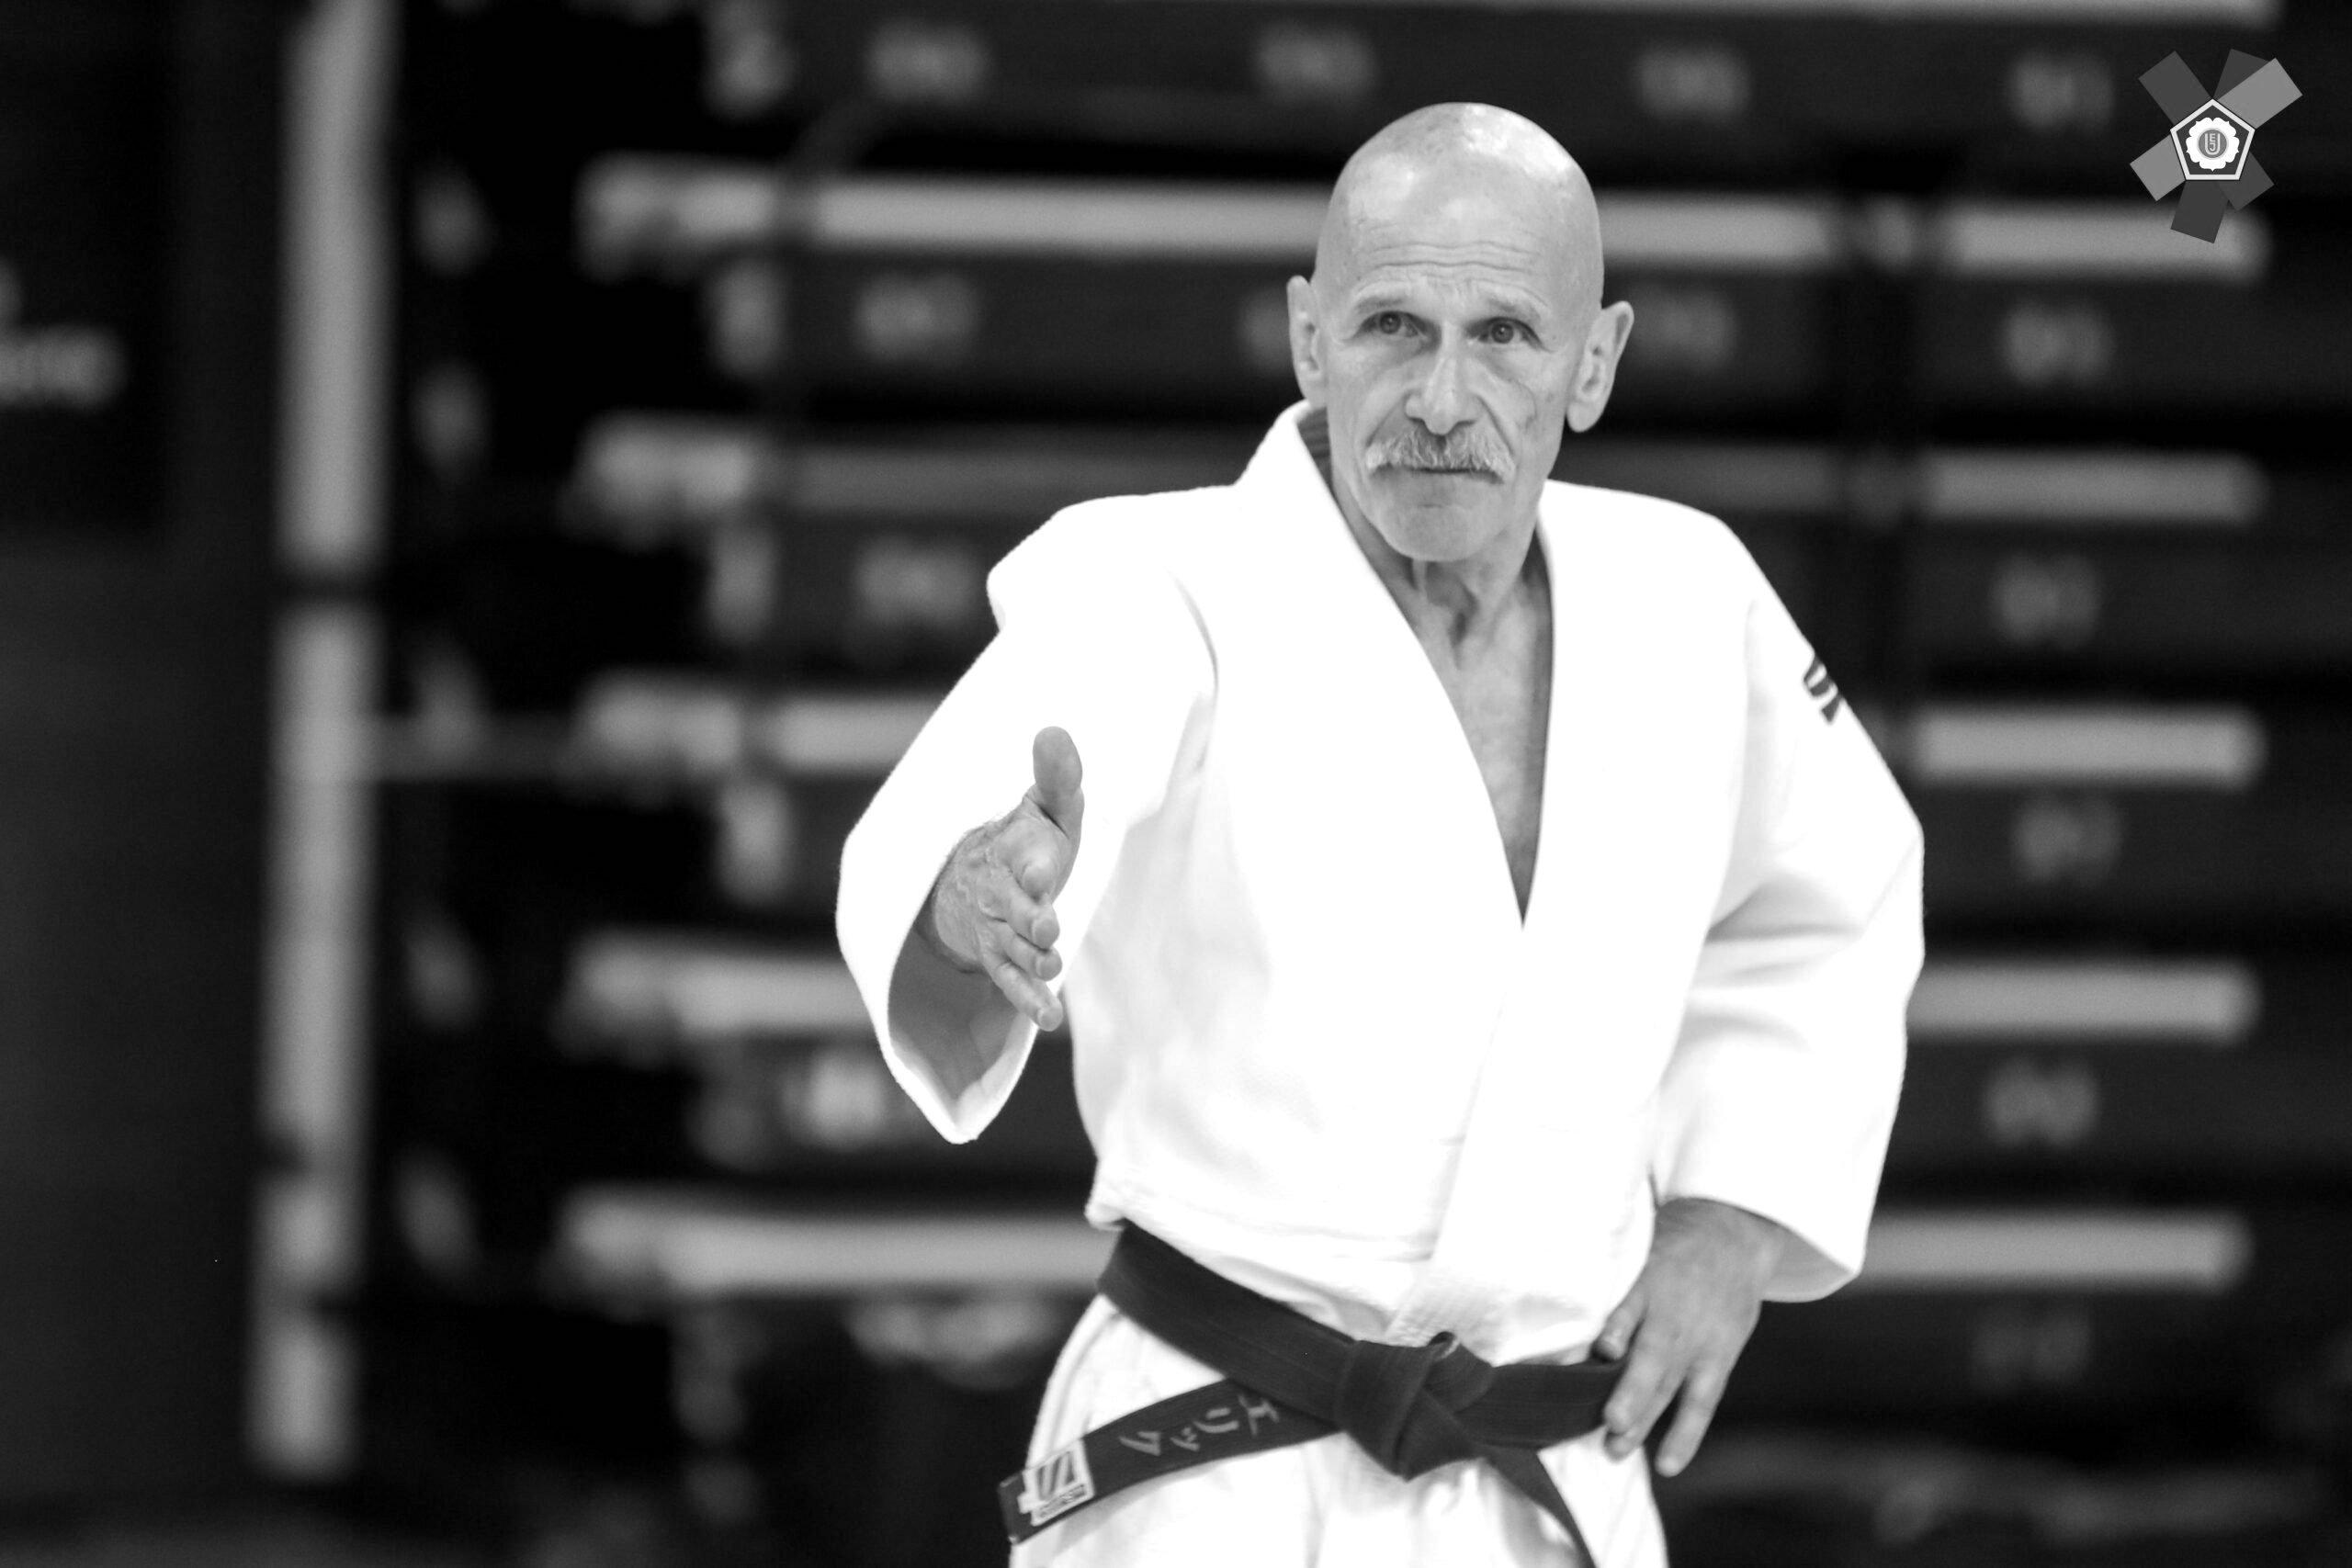 JUDO FAMILY SADLY MOURN THE PASSING OF ERIC VEULEMANS